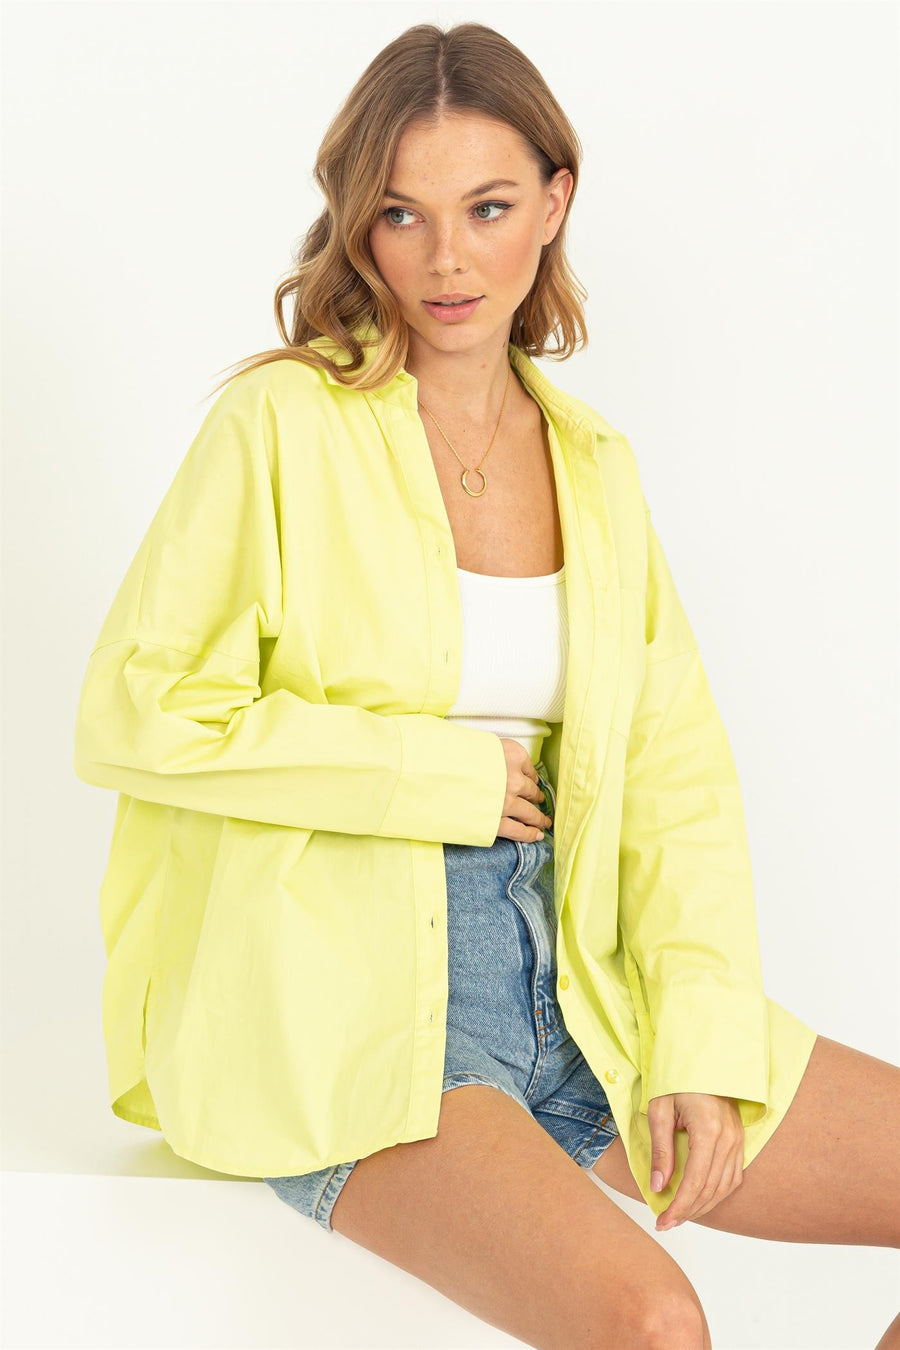 Neon green oversized button up.